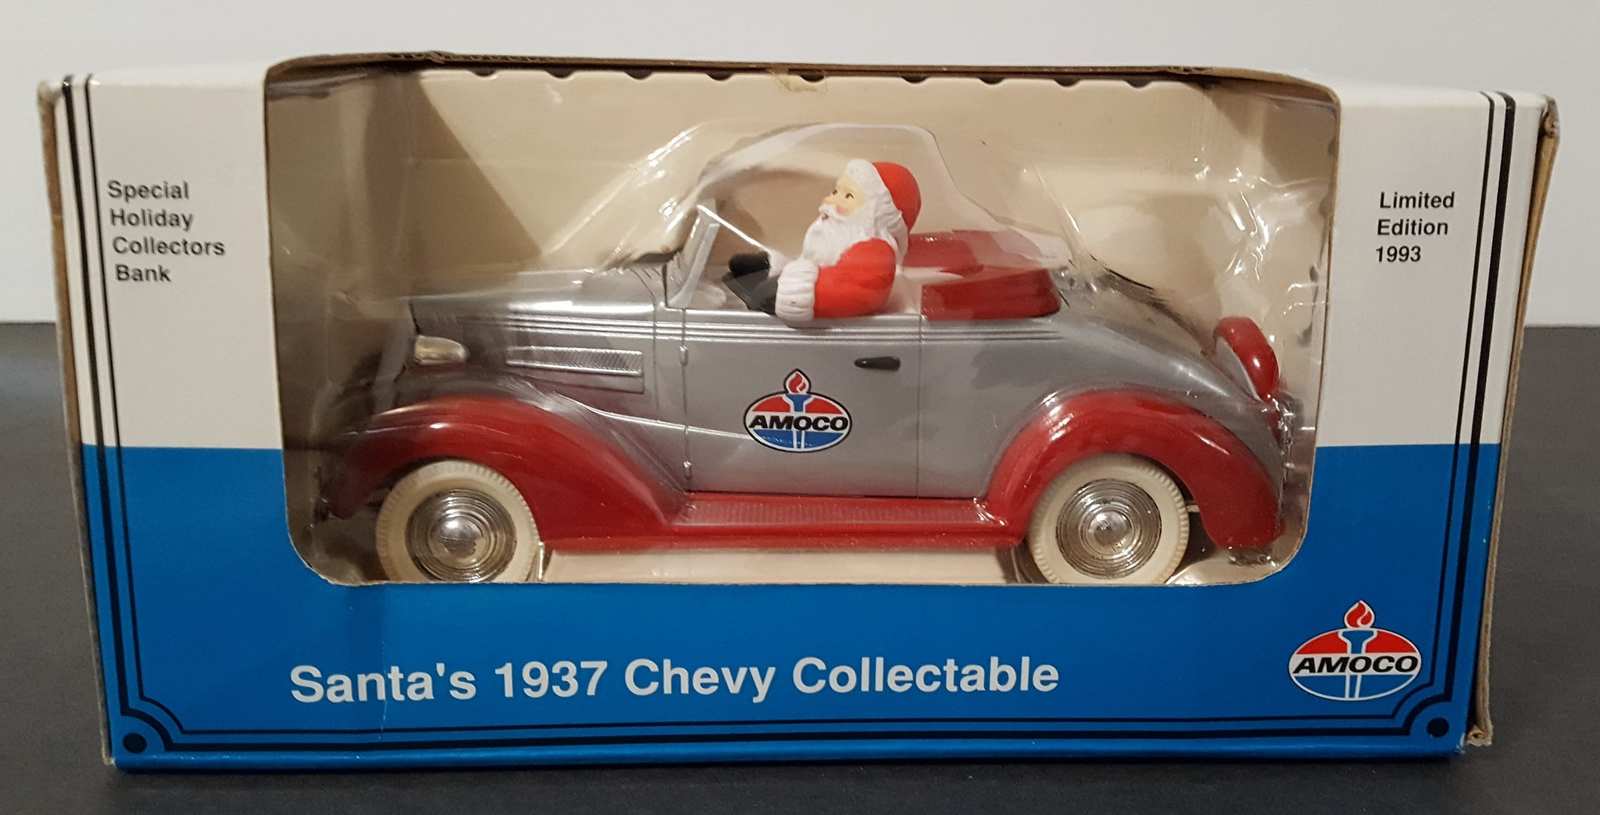 NEW Vintage Amoco Santa's 1937 Chevy Convertible Die cast Metal Bank with Key - $33.99